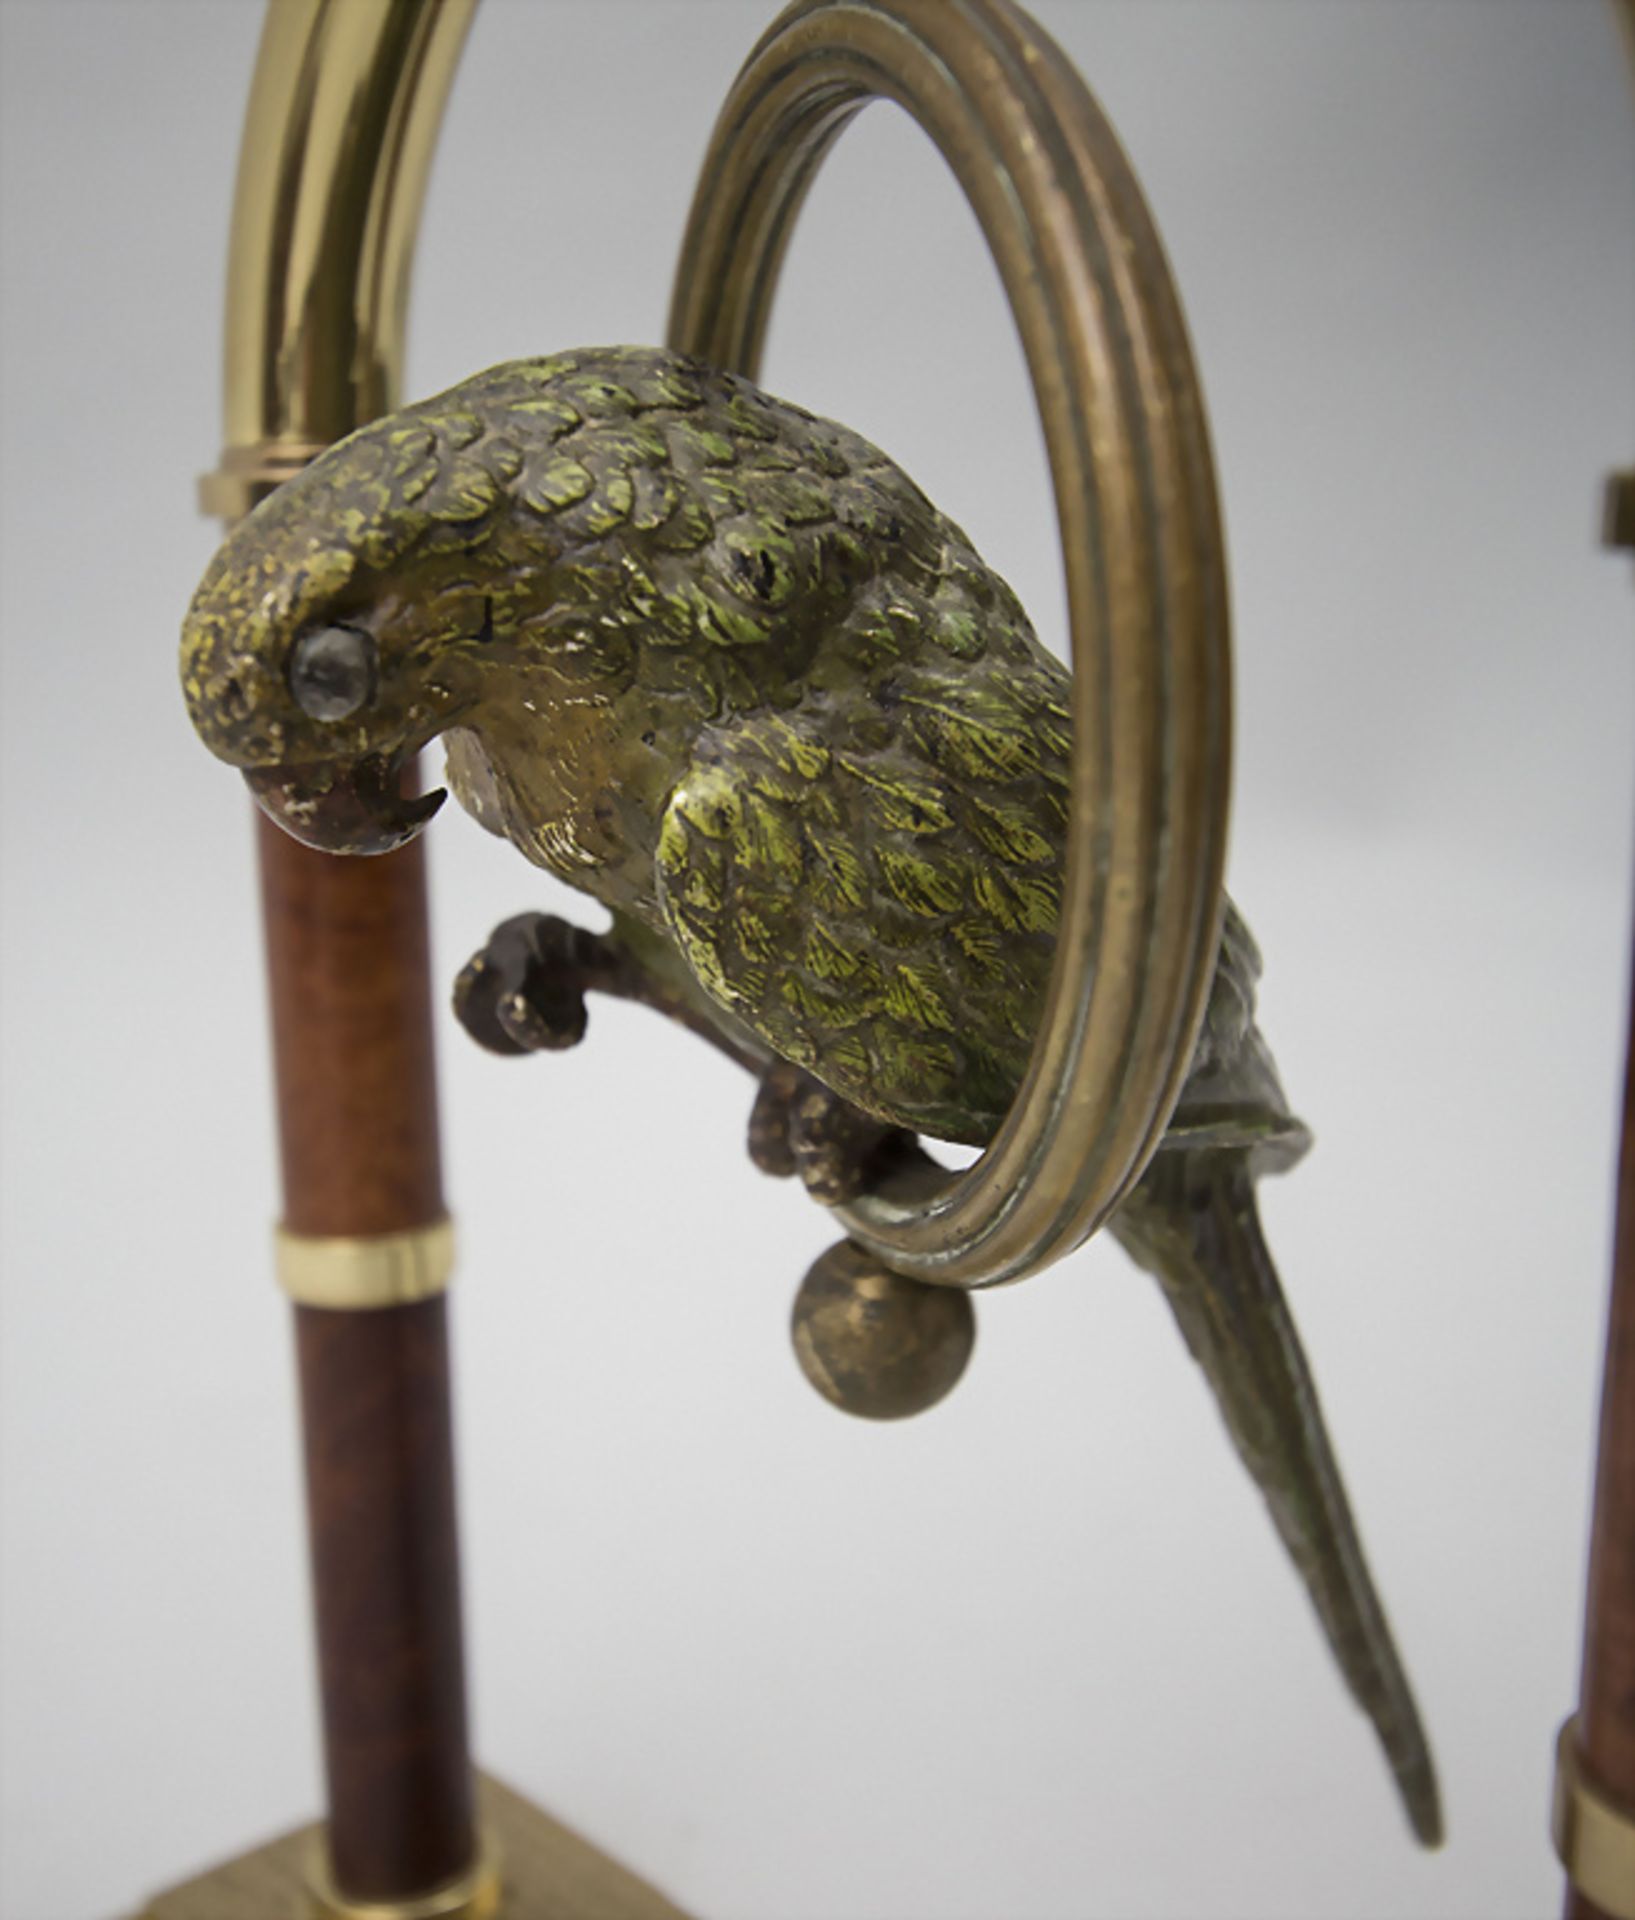 Bronze Papagei / A bronze parrot, 20. Jh. - Image 6 of 6